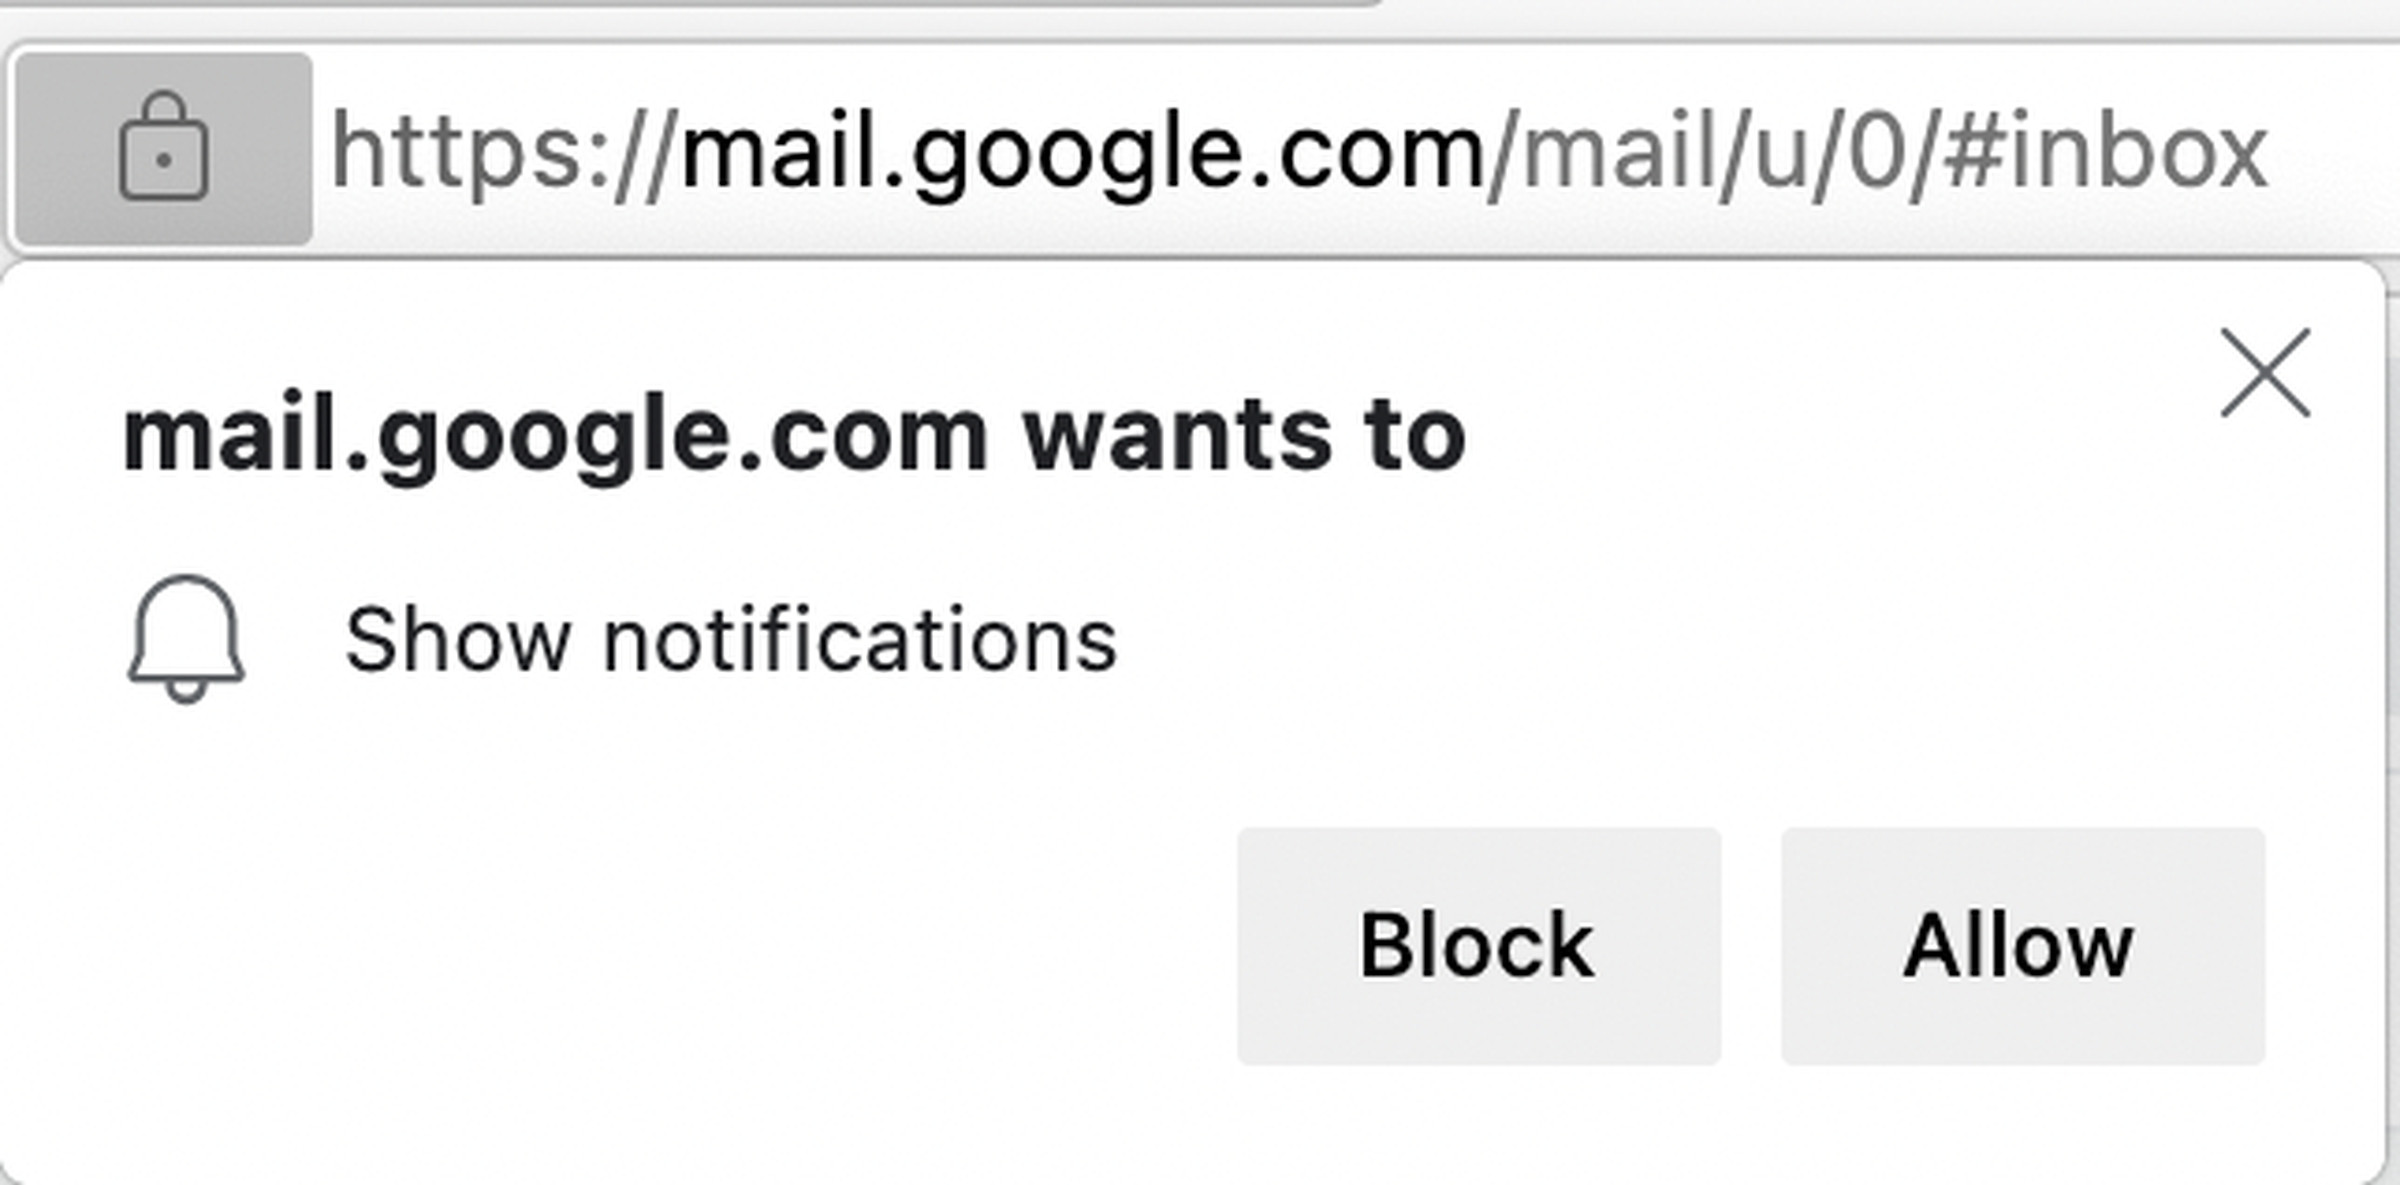 If enough people click “block,” Edge will stop showing the notification request to users.